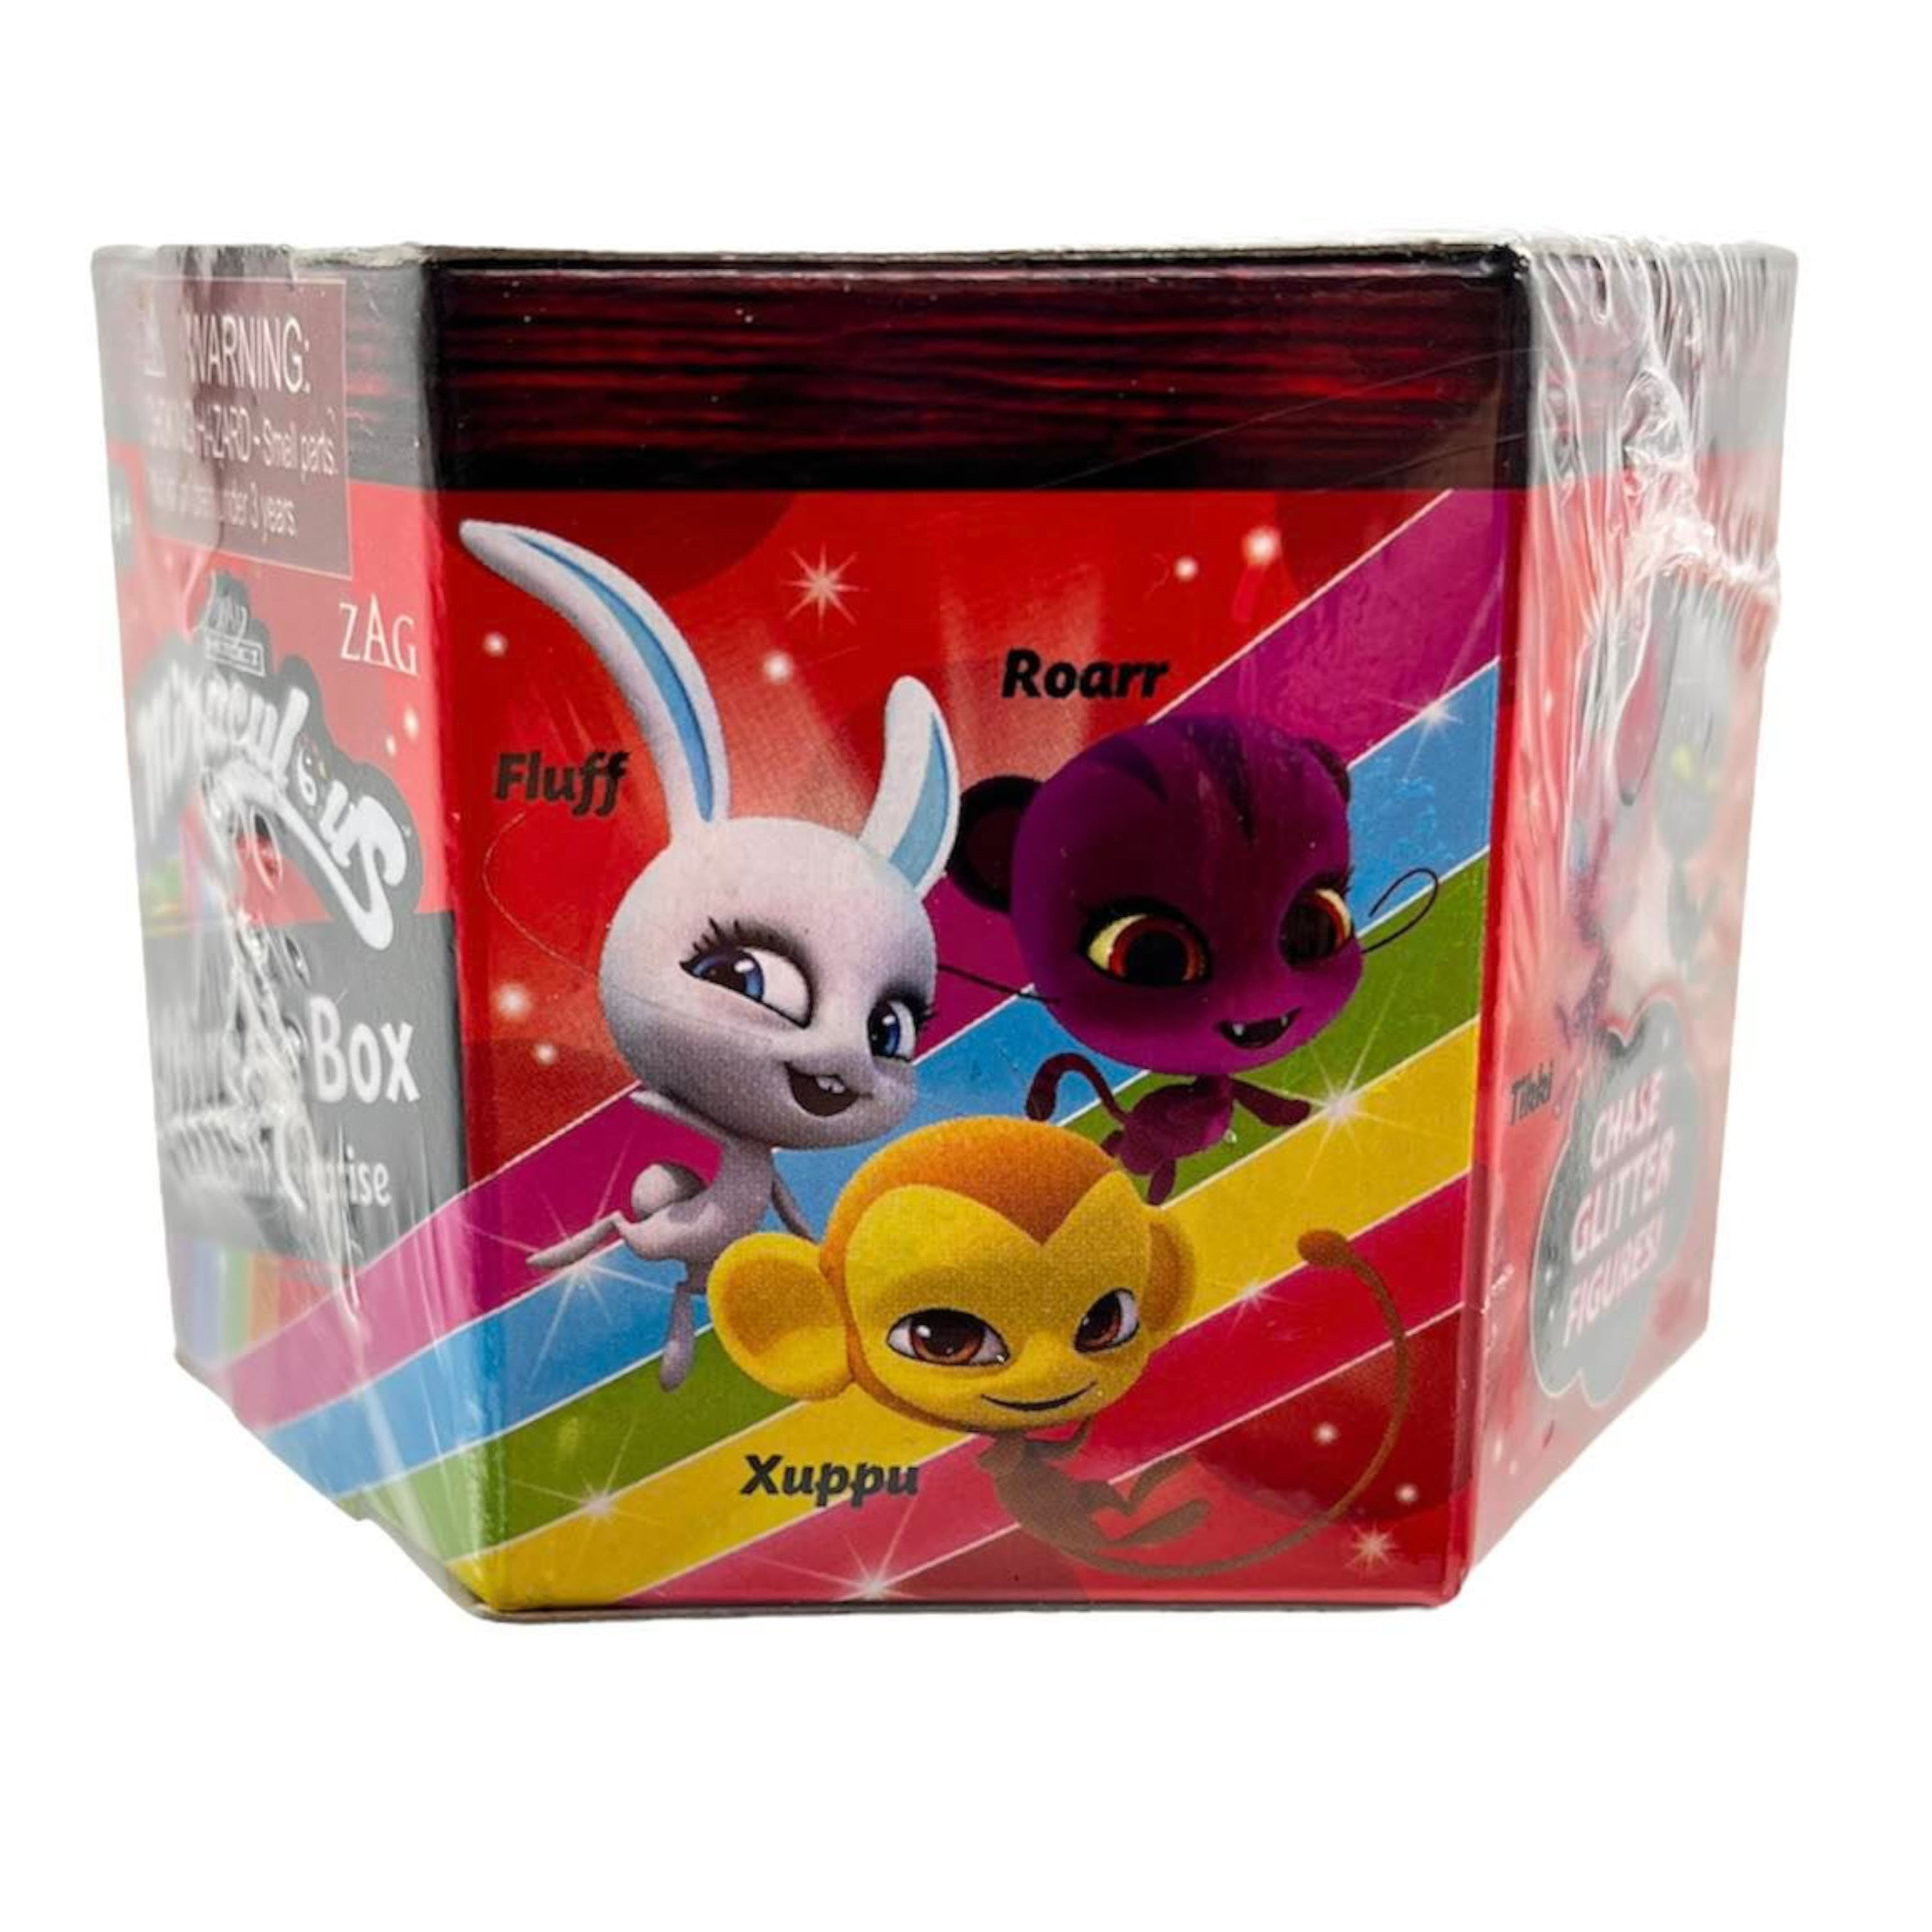 Miraculous Miracle Box Kwami Surprise Mystery Pack [1 RANDOM Figure]